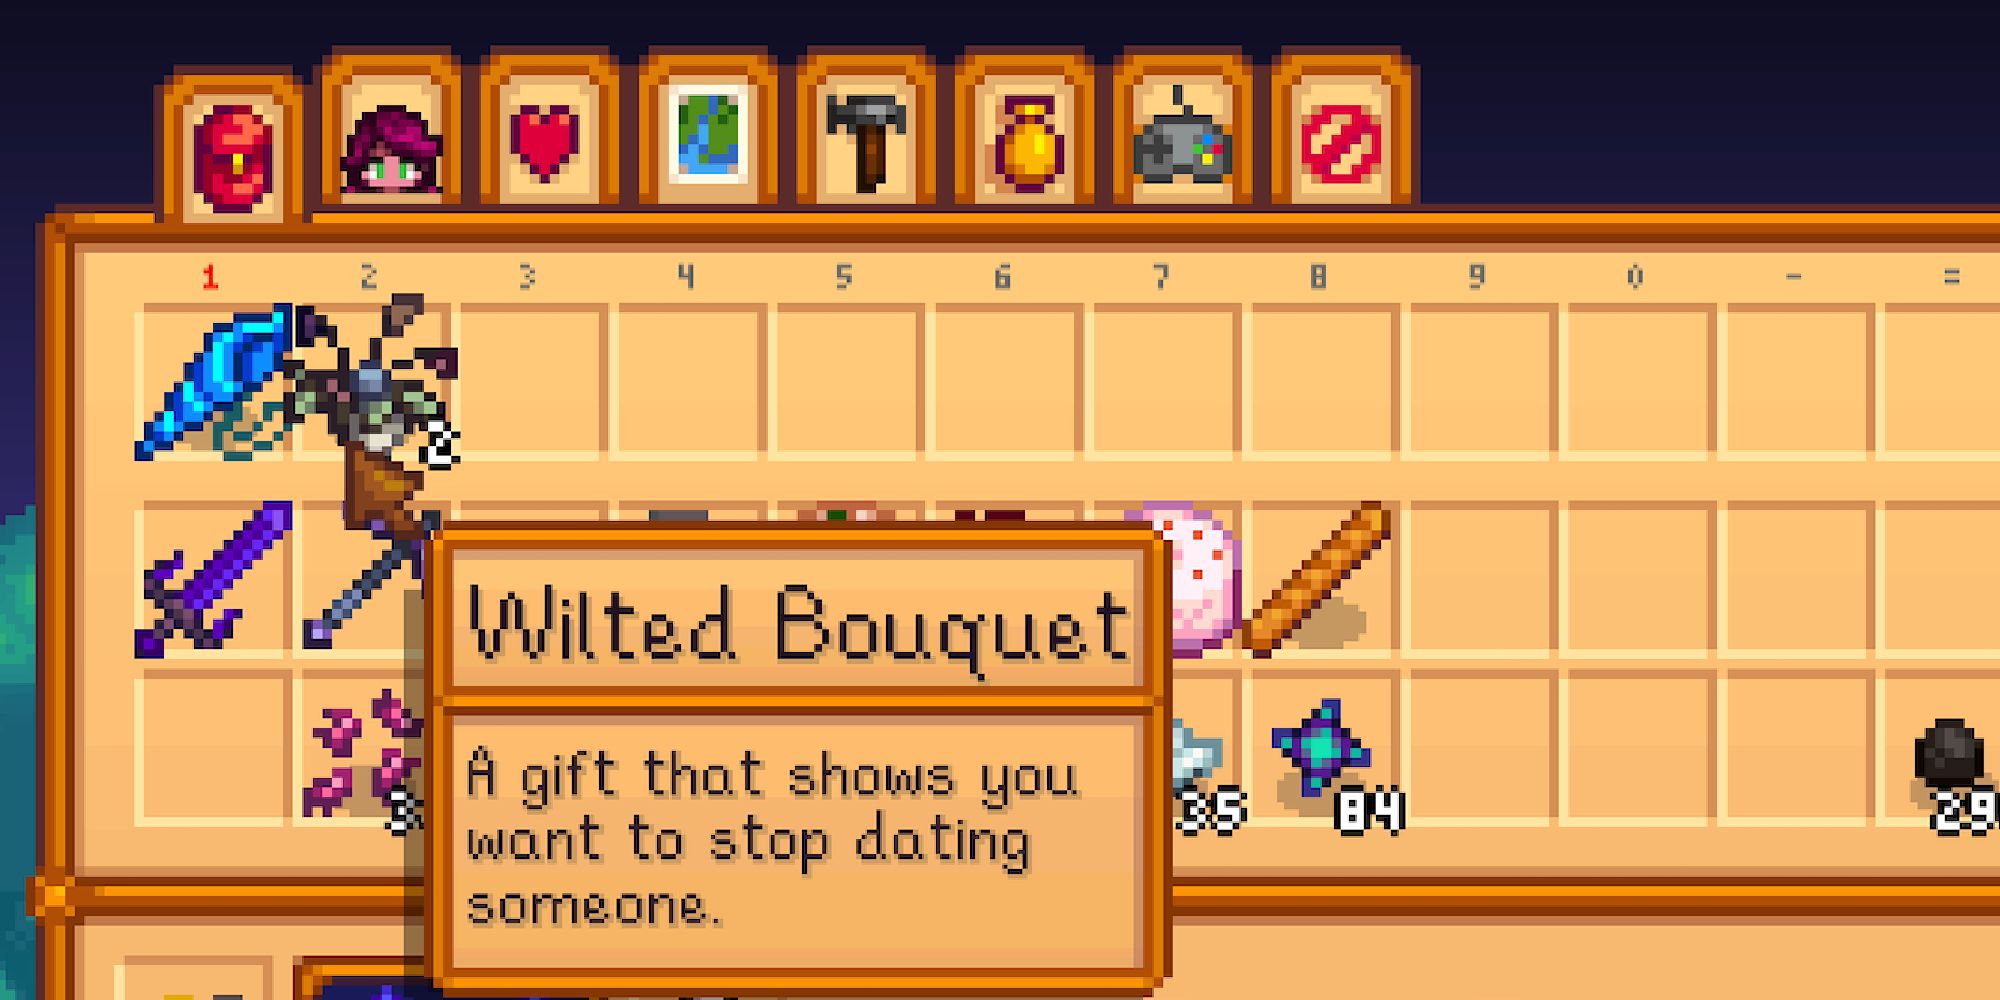 stardew valley wilted bouquet within player inventory